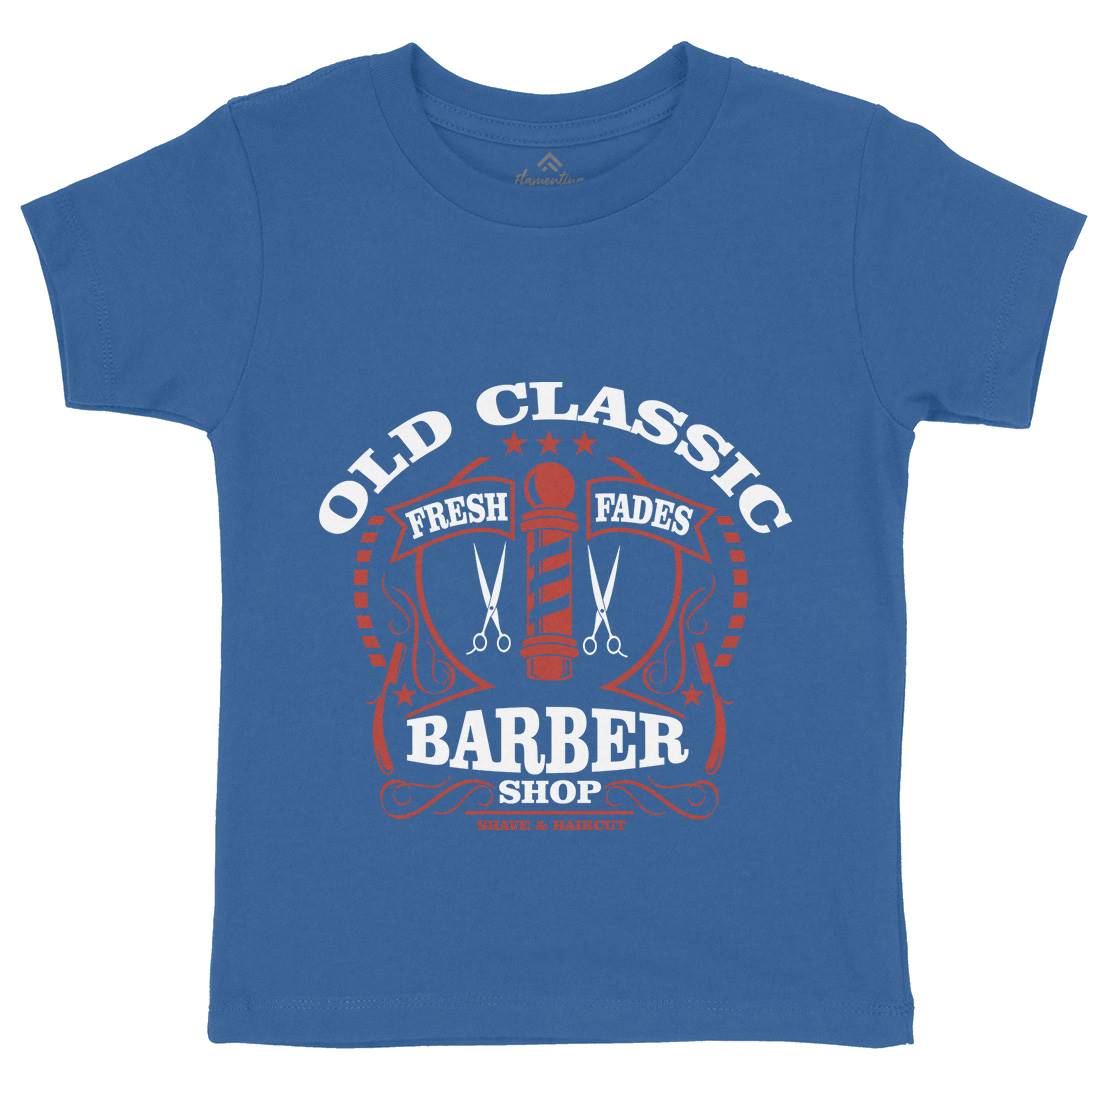 Old Classic Kids Crew Neck T-Shirt Barber A099